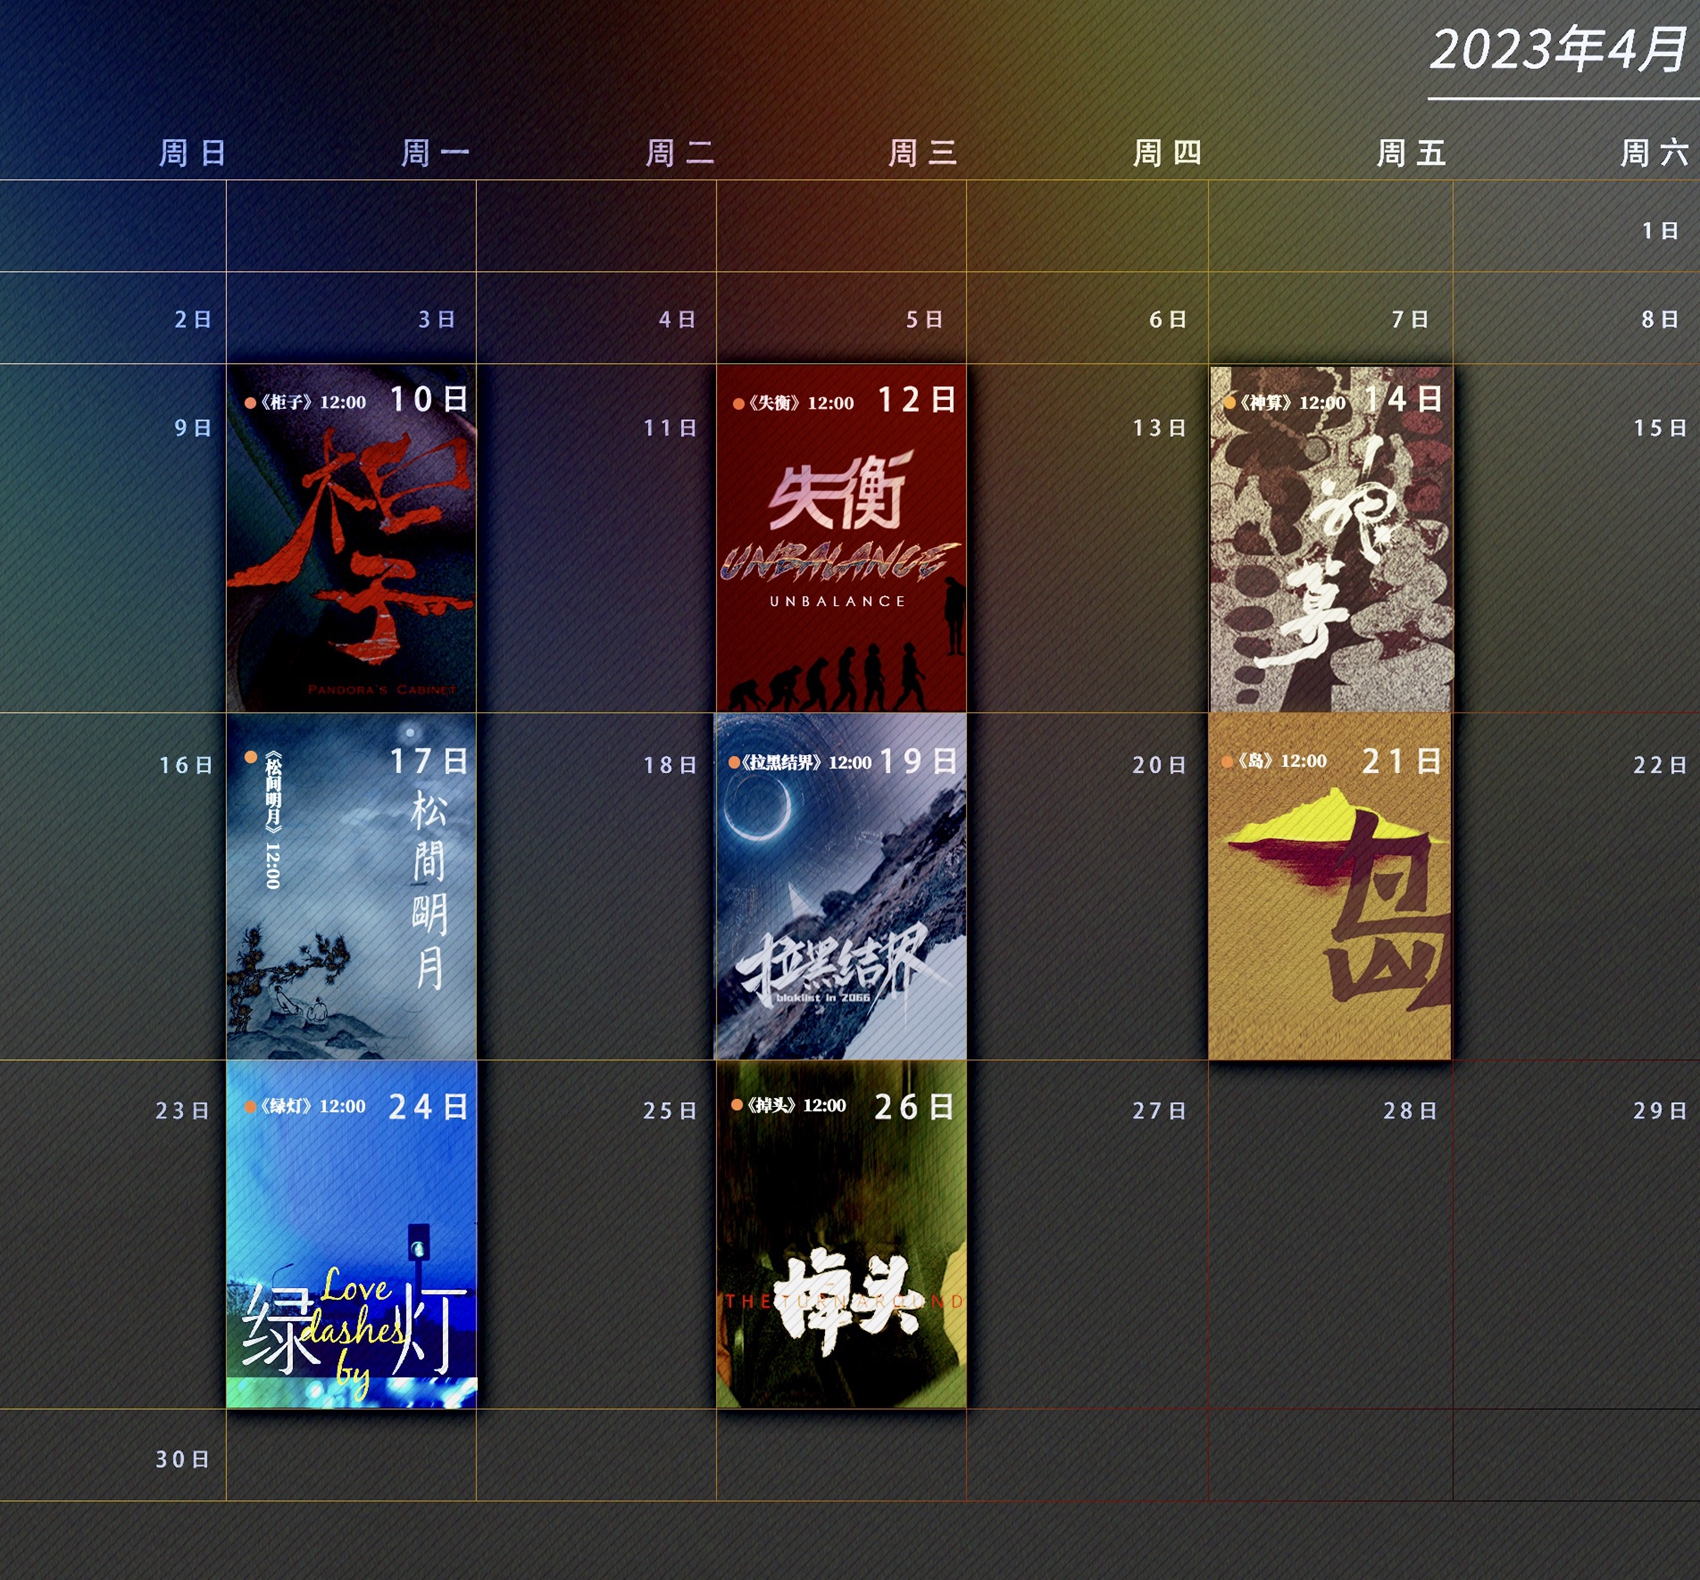 The release schedule for the eight films Photo: Courtesy of Tencent Video